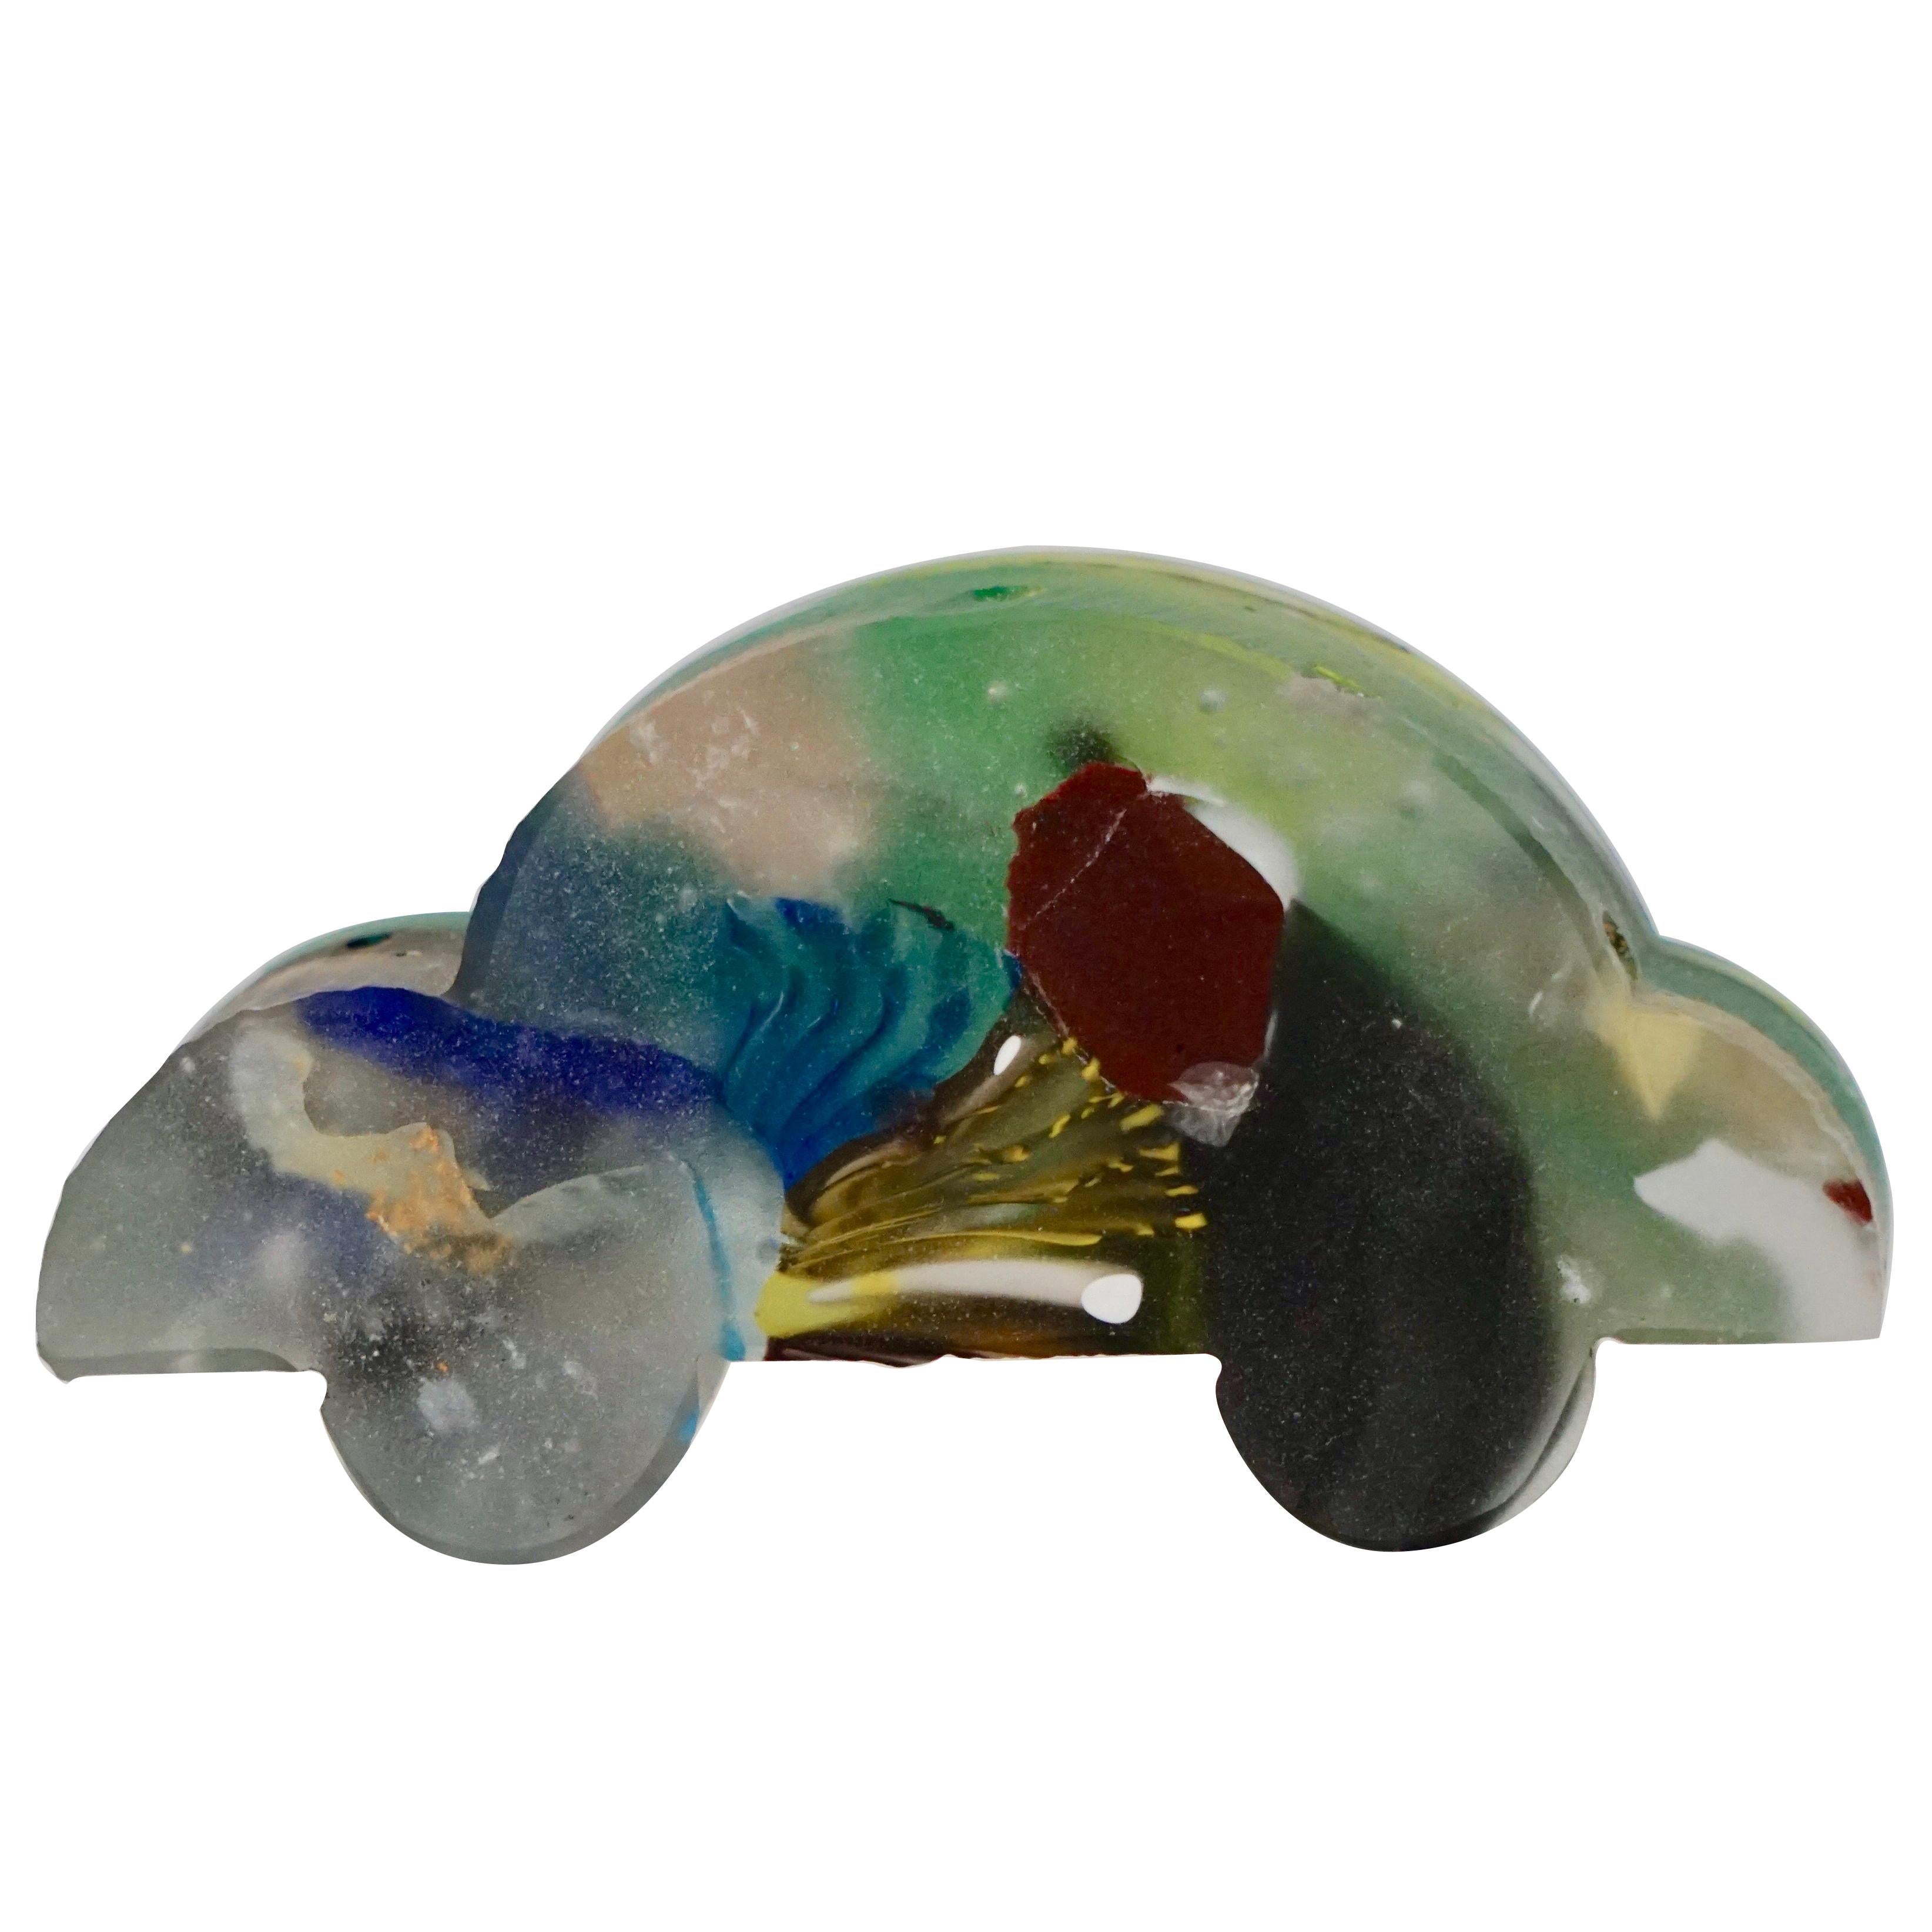 Contemporary Recycled Blue Green Yellow Murano Glass Decorative Car Sculpture